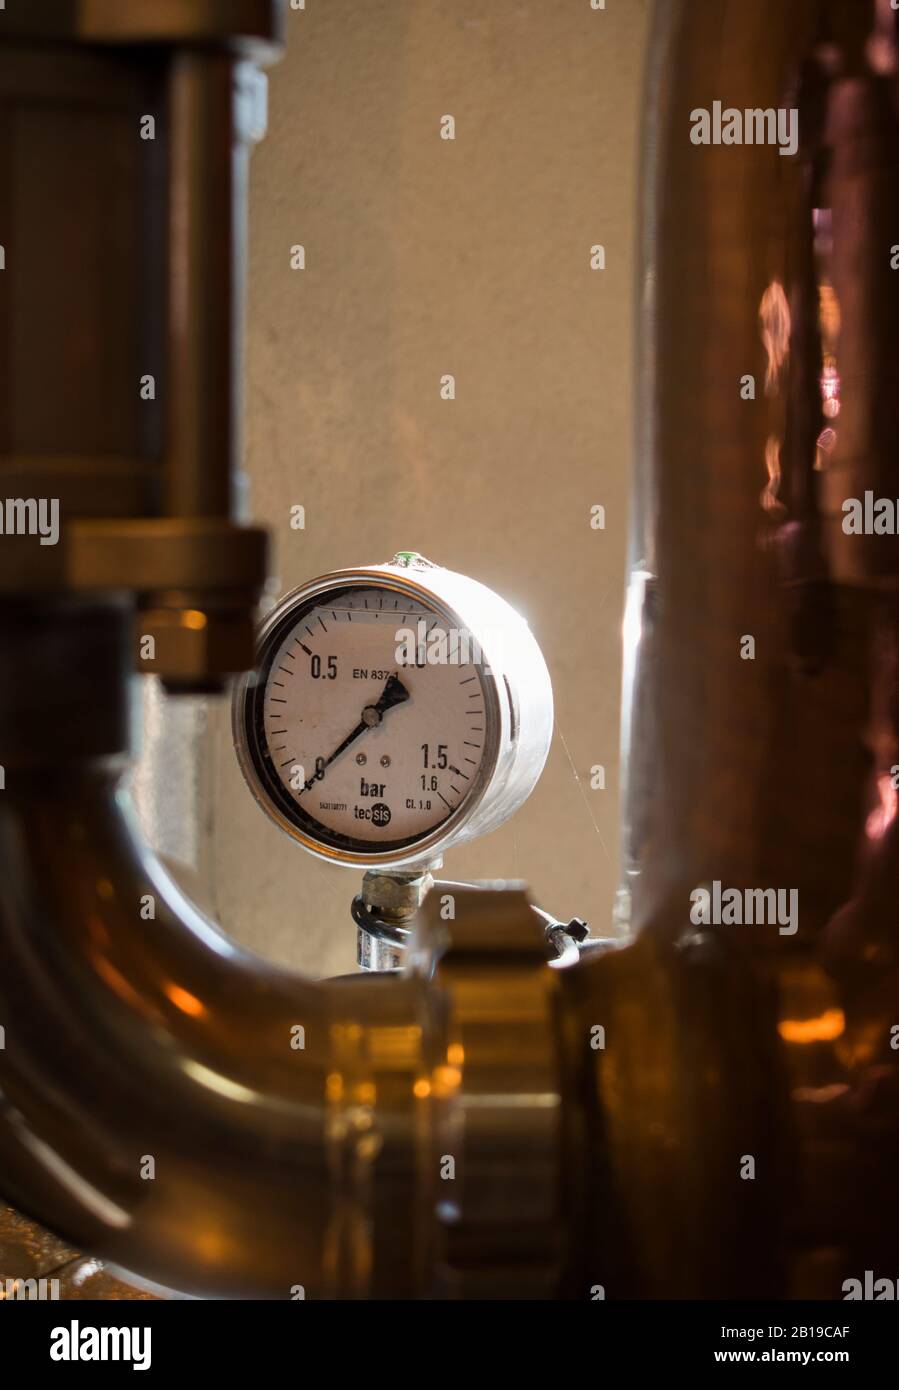 Copper Pot Still and other Equipment used in the process of making artisan gin and whisky at the Cotswold Distillery, Worcestershire, UK Stock Photo